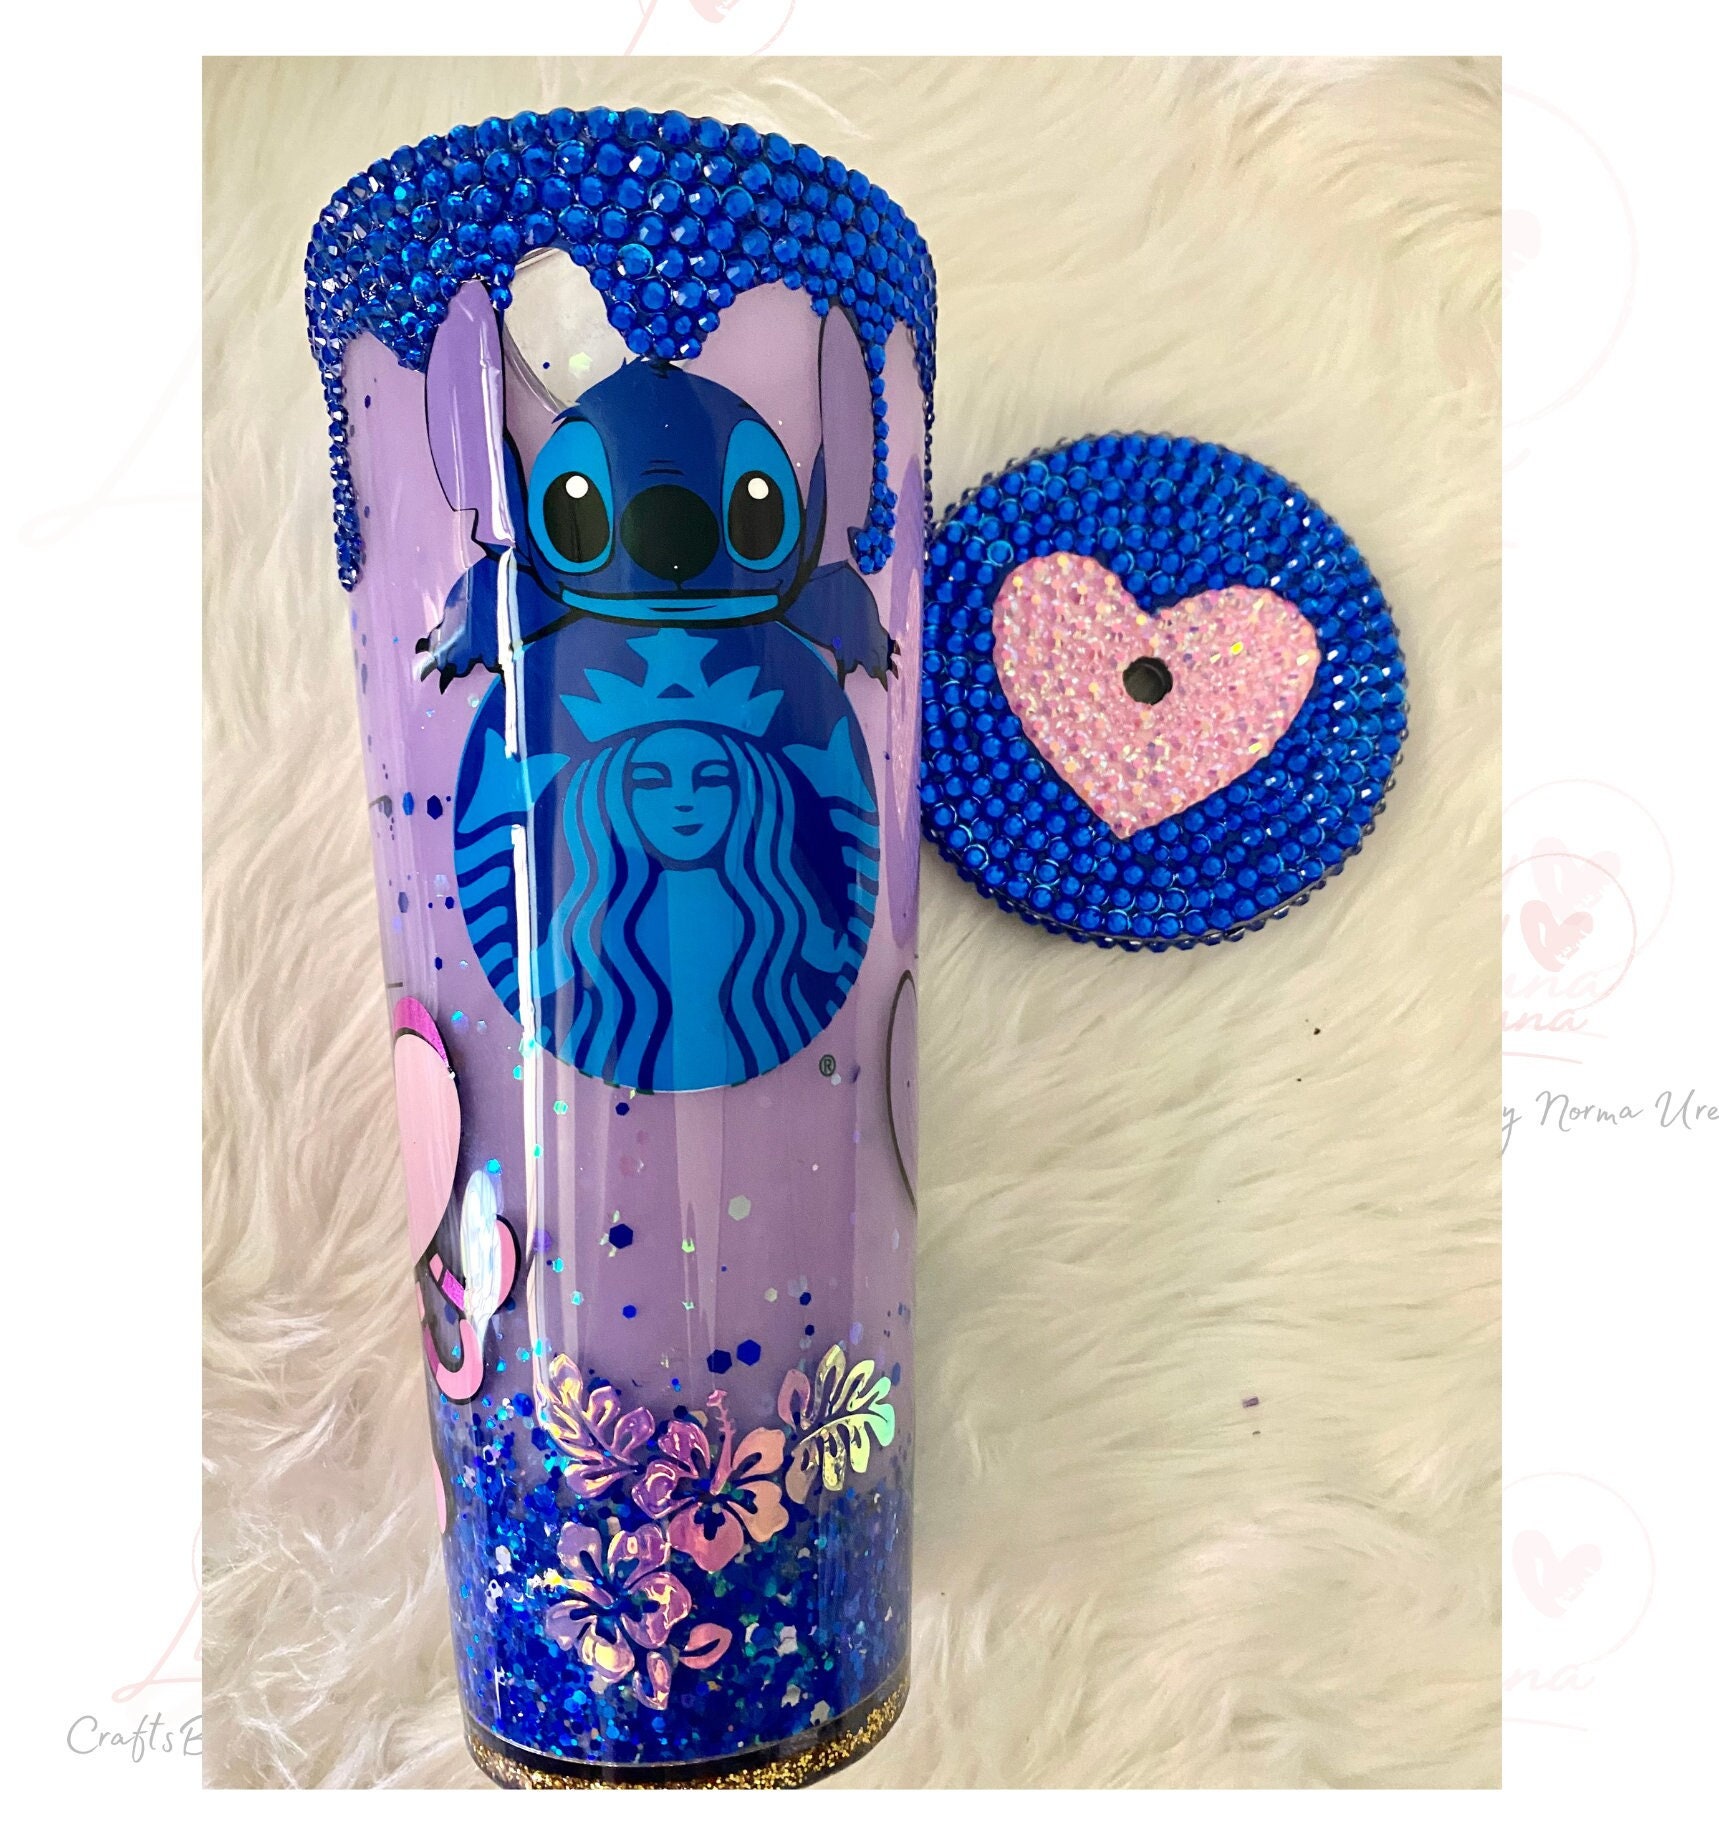 Stitch Starbucks cup - Onia's designer space's Ko-fi Shop - Ko-fi ❤️ Where  creators get support from fans through donations, memberships, shop sales  and more! The original 'Buy Me a Coffee' Page.